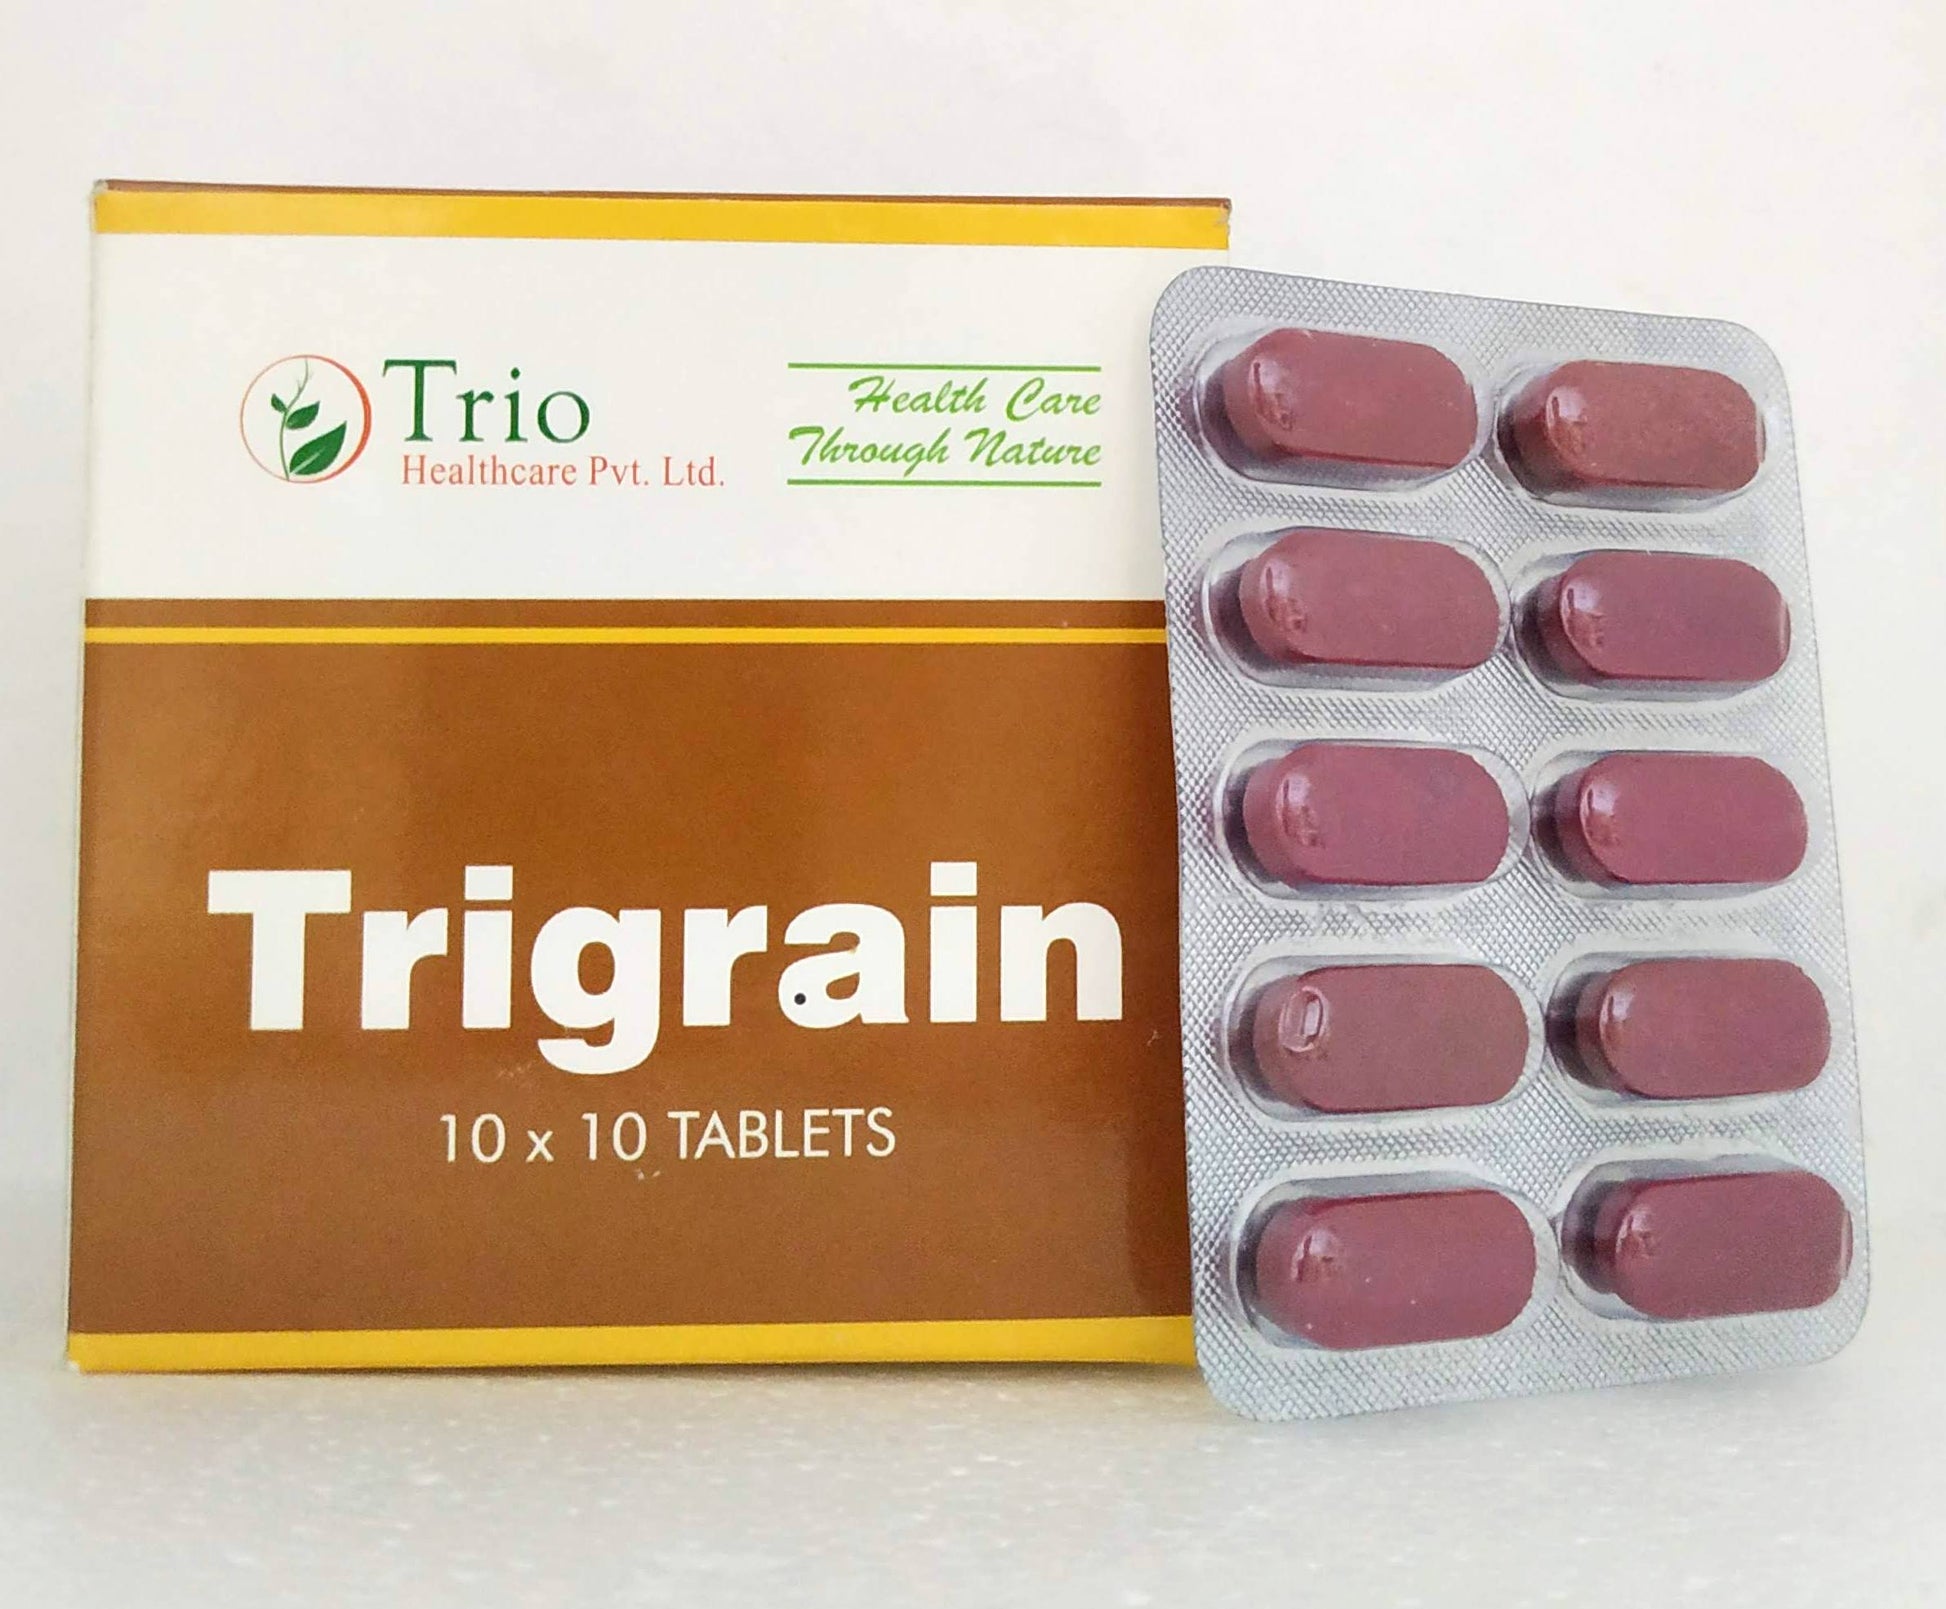 Shop Trigrain tablets - 10tablets at price 66.00 from Trio Online - Ayush Care